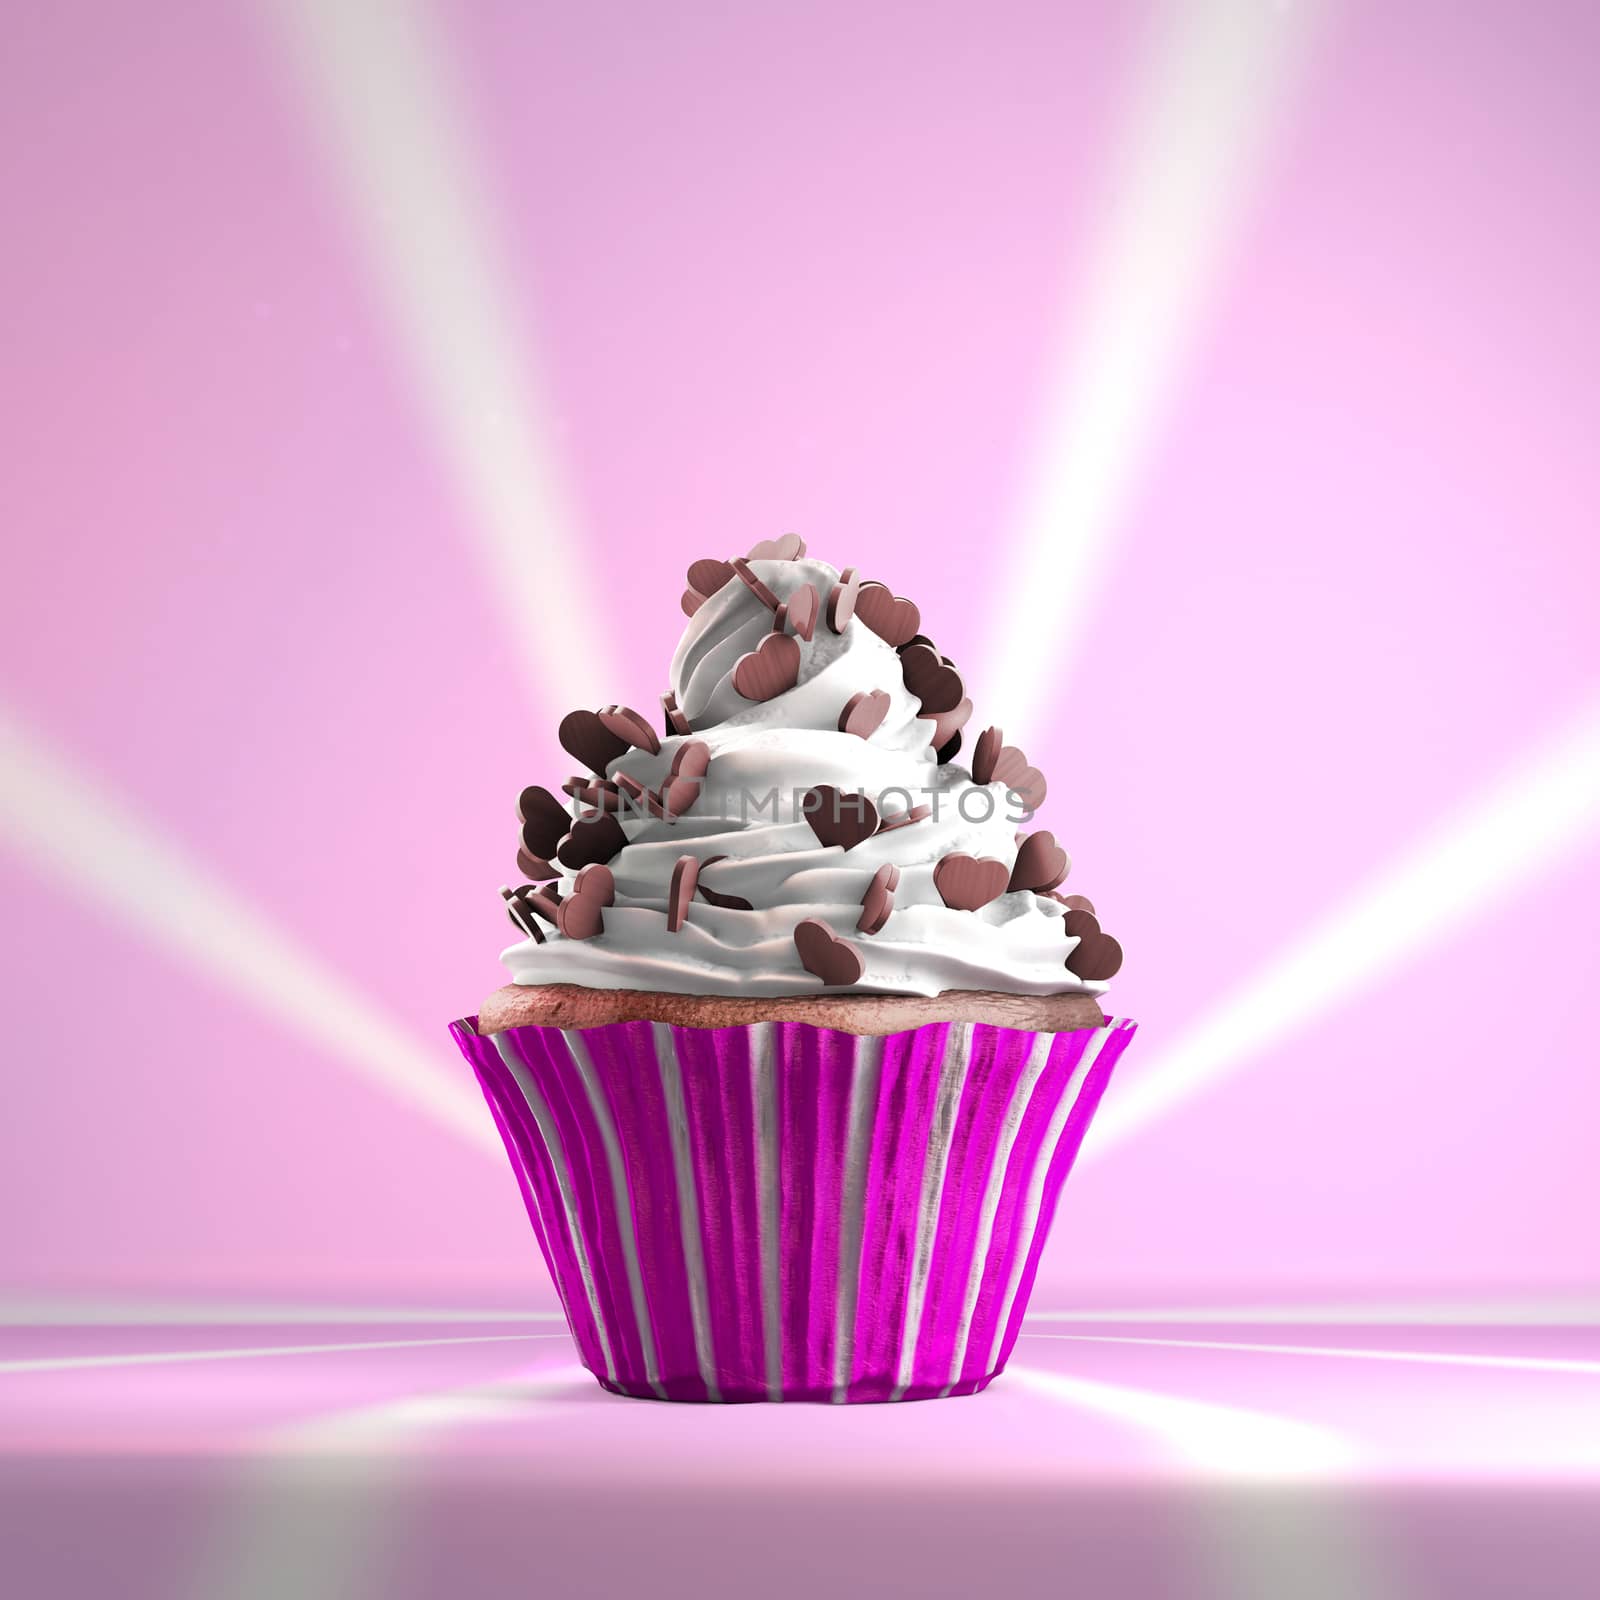 Delicious cupcake with chocolate hearts on a whipped cream. by ytjo